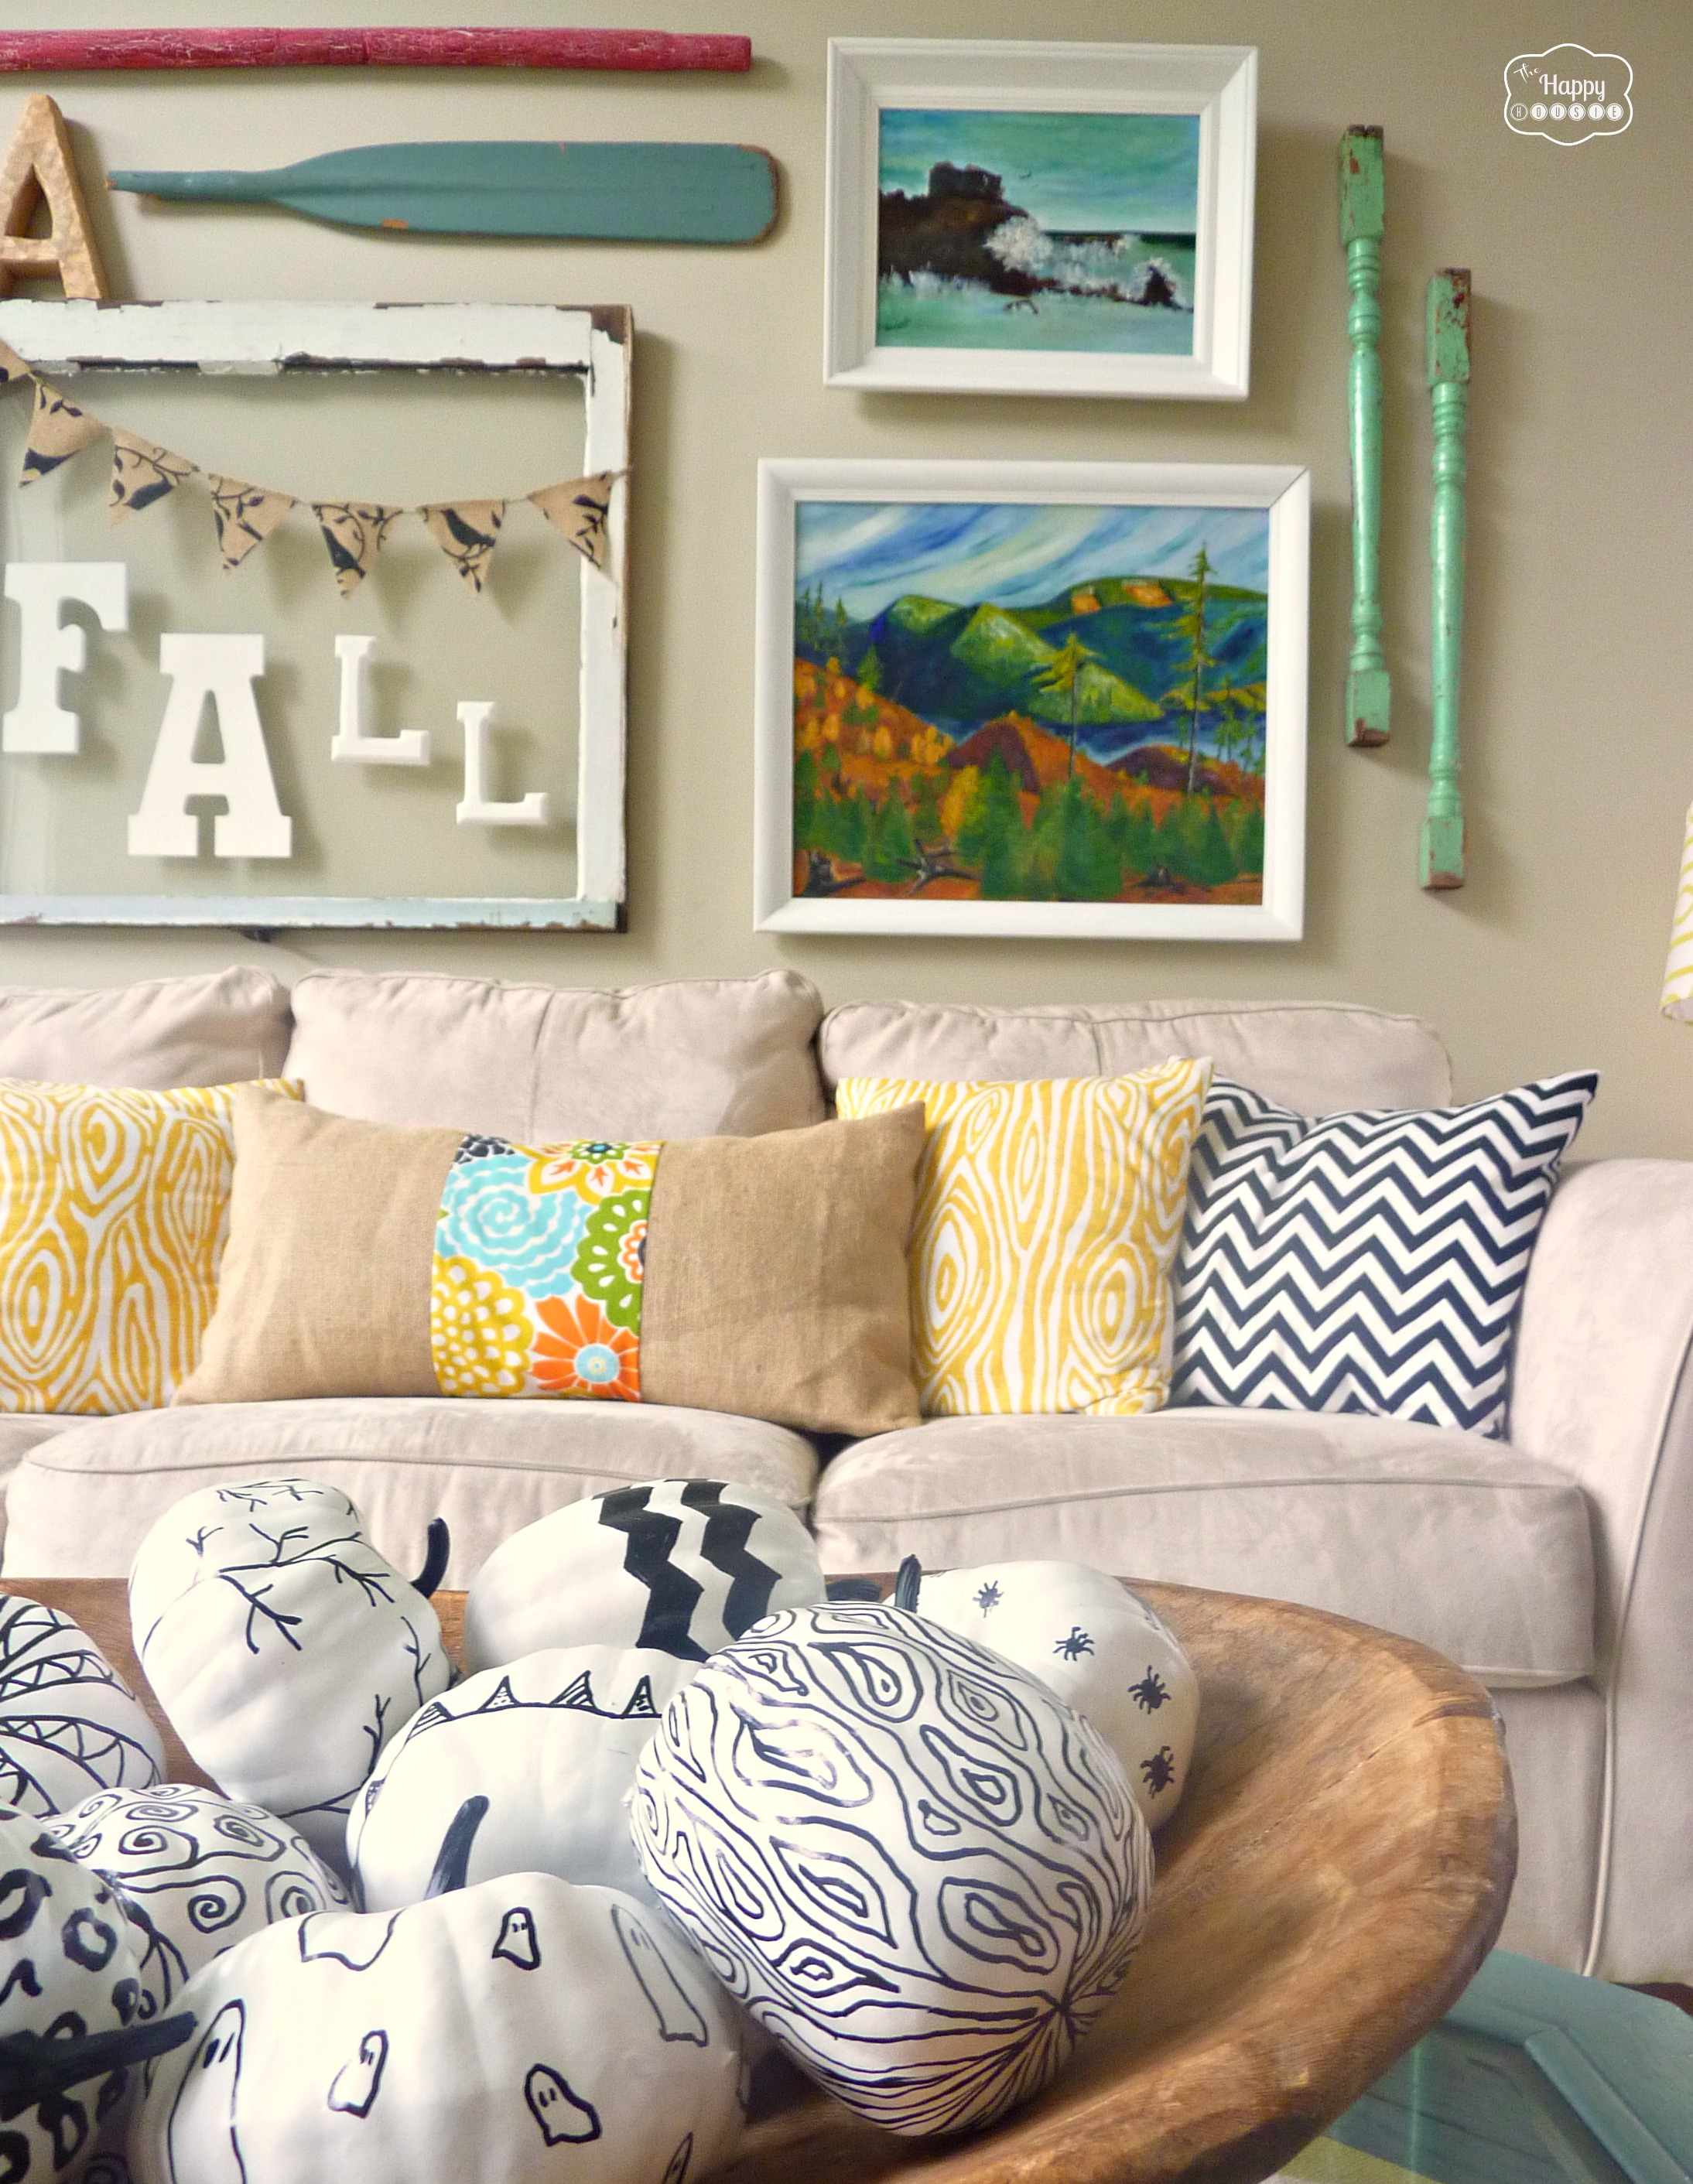 Fall-ifying the Living Room